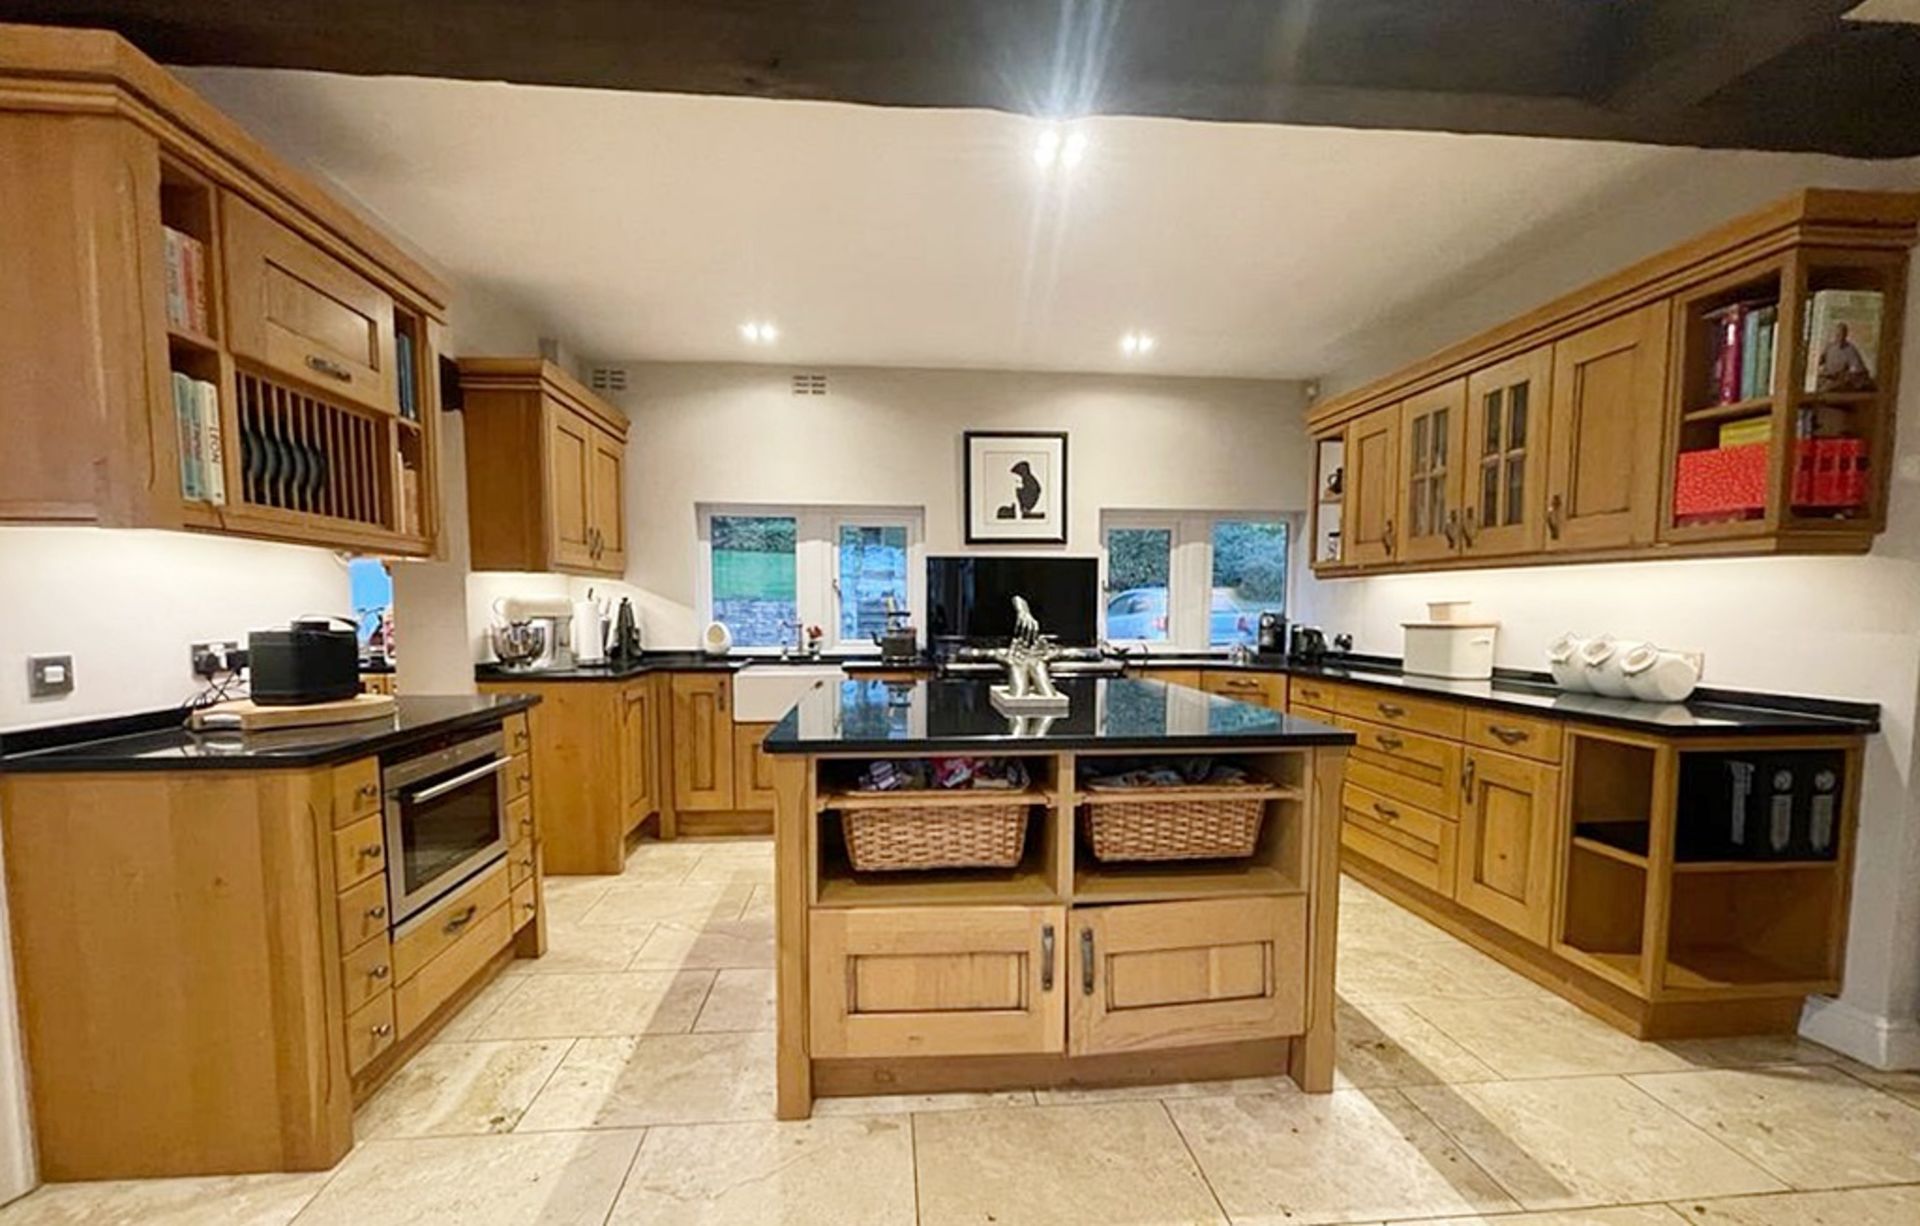 1 x Bespoke Fitted Solid Oak Kitchen With Black Granite Worktops, Central Island, Attached Dining - Image 2 of 65